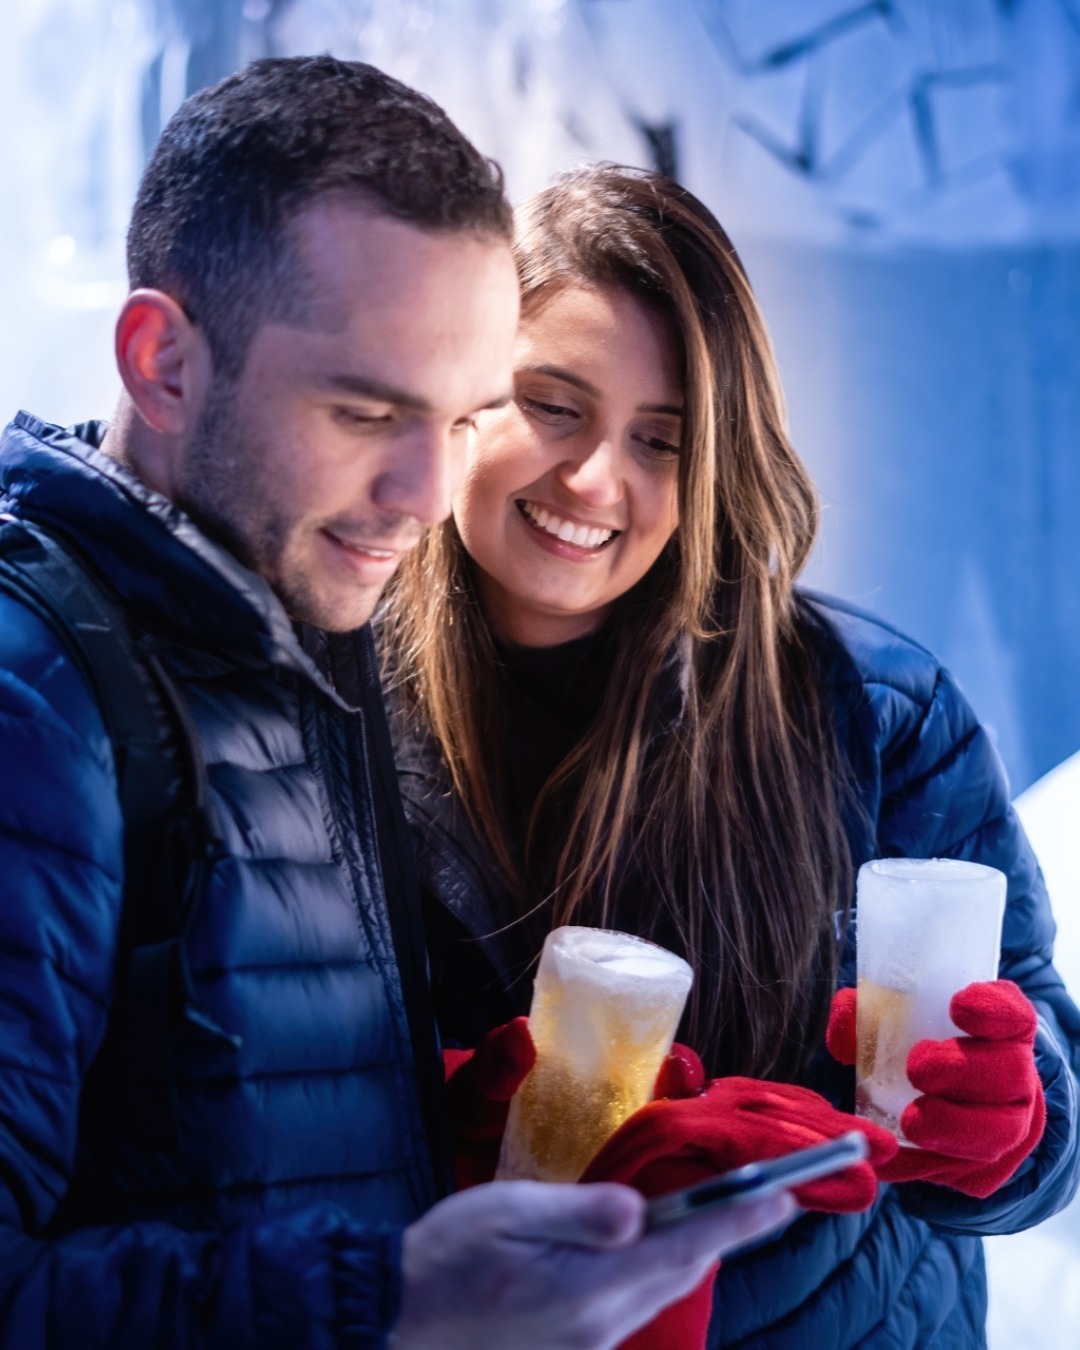 Feel the chill vibes at the Berlin Icebar ❄️ From frosty cocktails to icy sculptures, come along for the coolest experience in Berlin 💙

#berlin #berlinicebar #icebarberlin #berlincity #berlinlife #thingstodoinberlin #barsinberlin #berlinmitte #bestbarinberlin